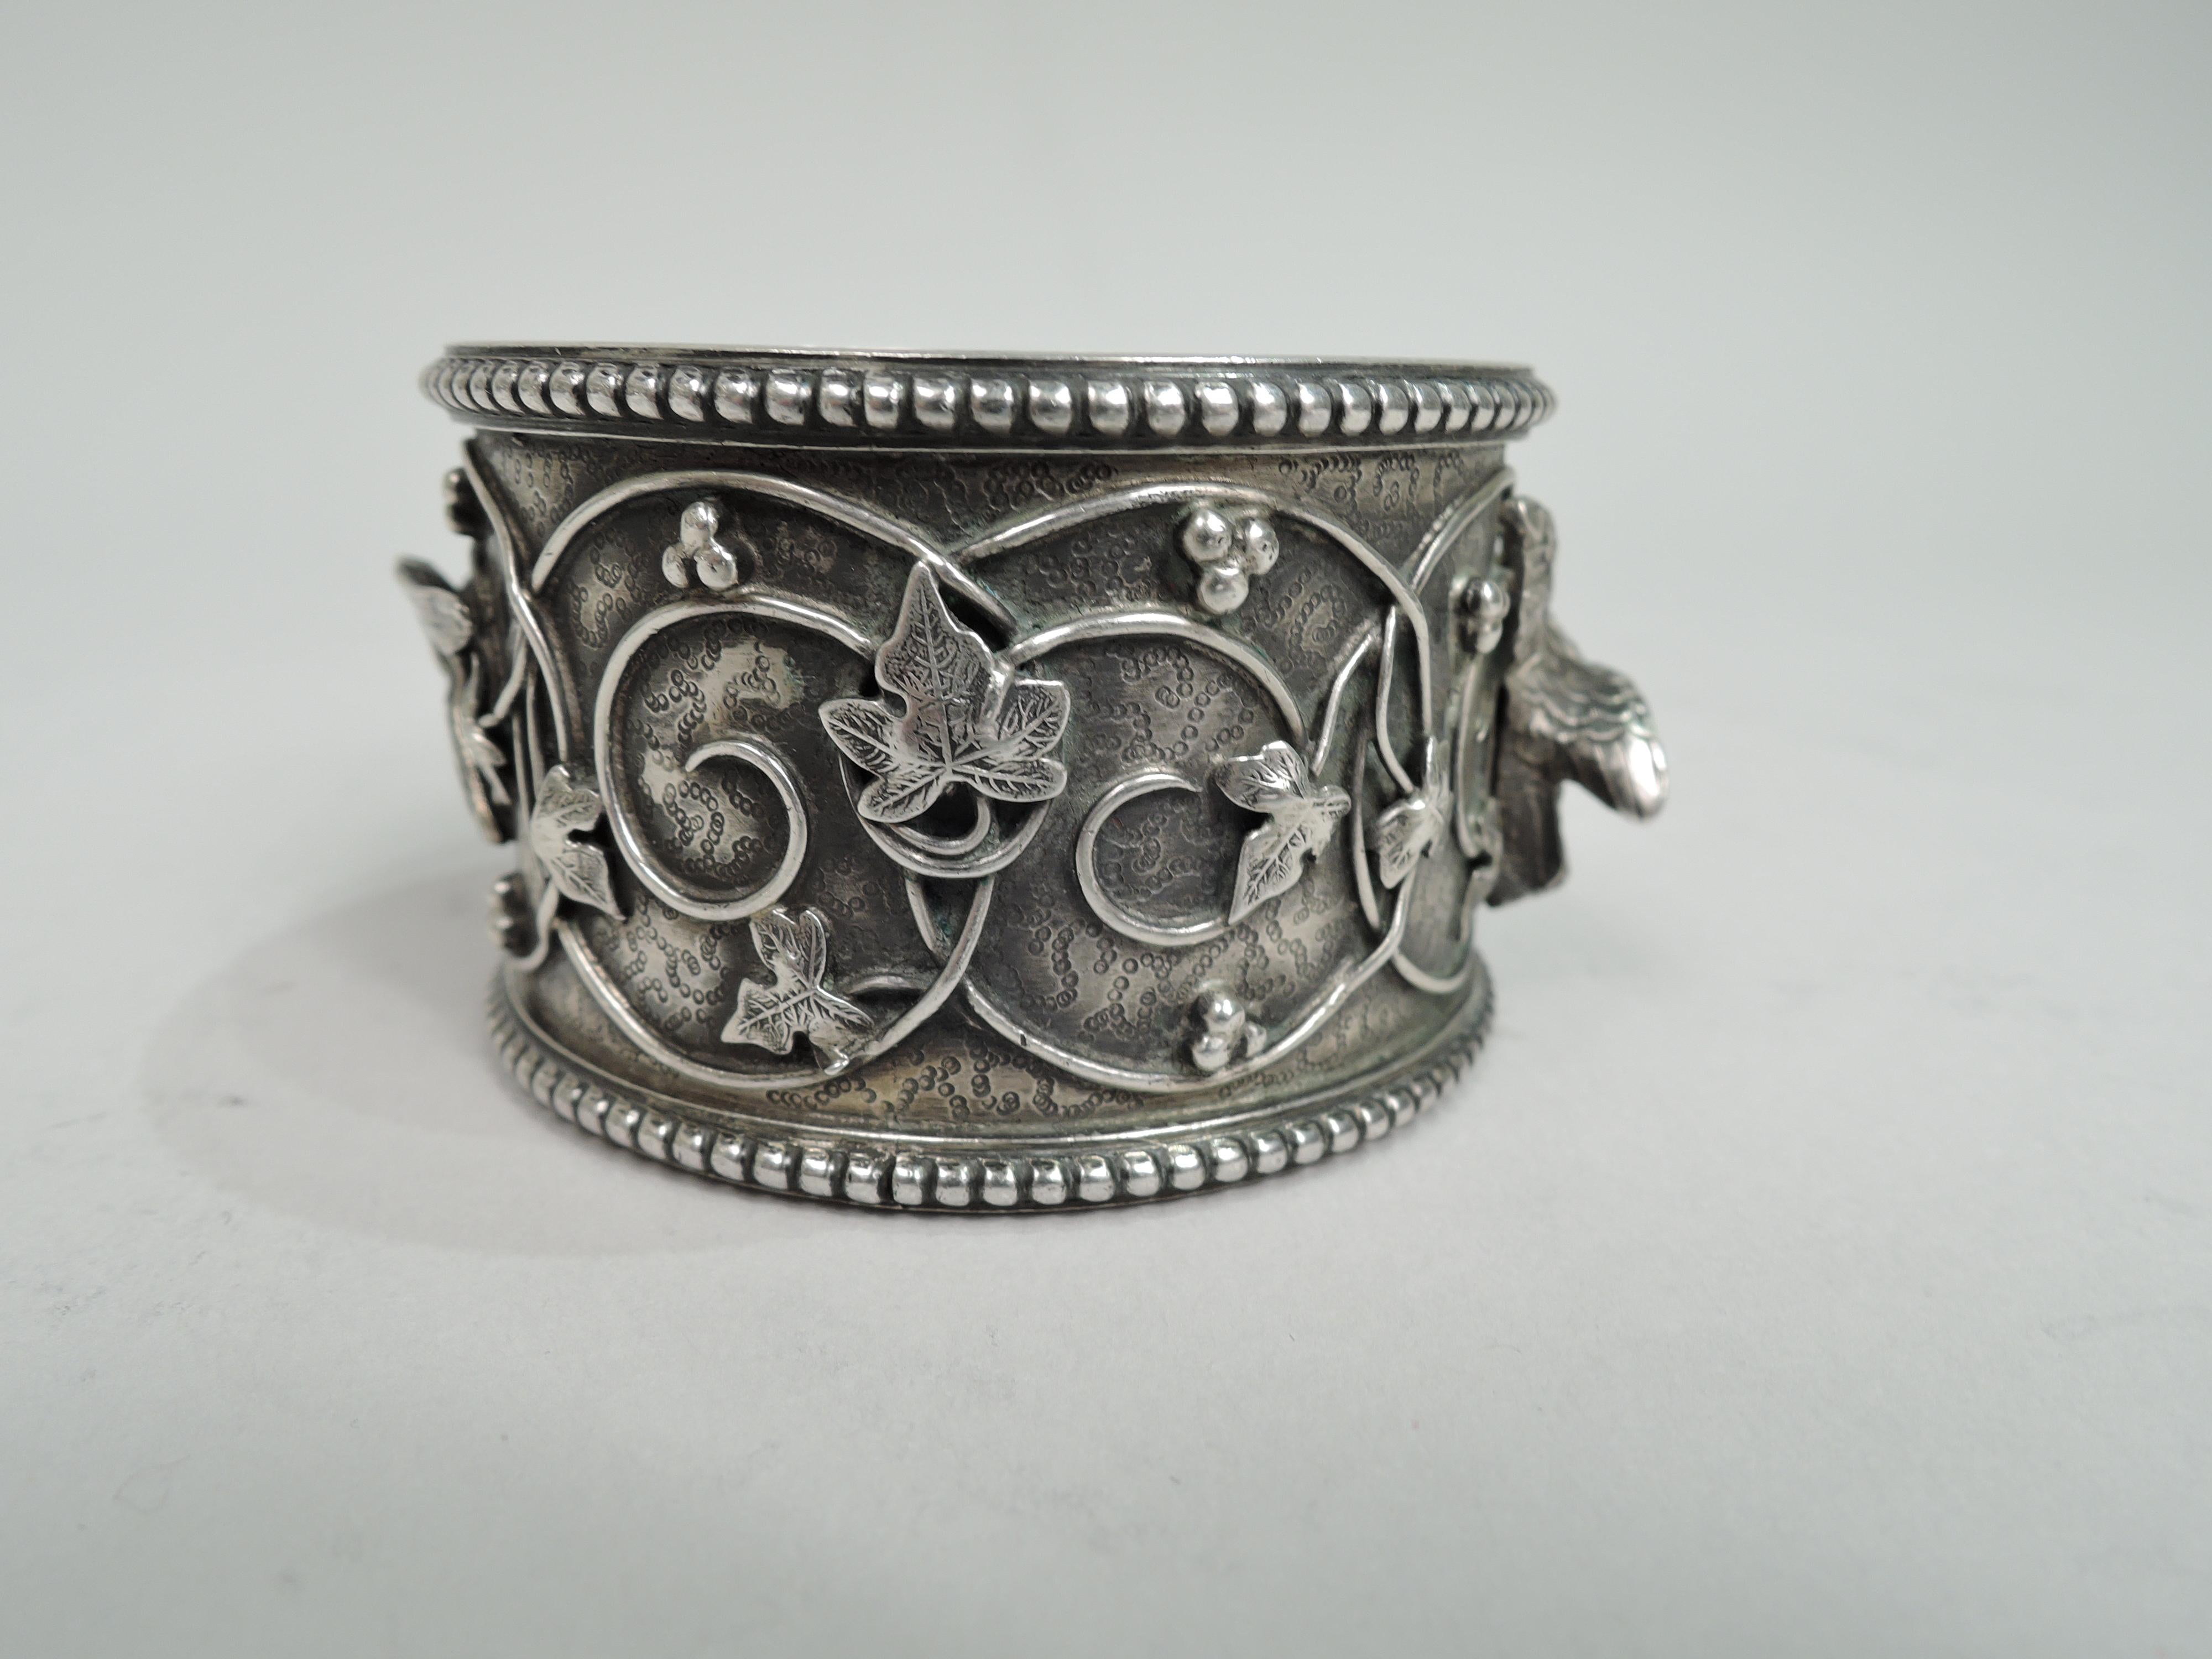 Bird’s Nest sterling silver napkin ring. Made by Tiffany & Co. in New York, ca 1890. Leafing wire rinceaux and 2 cast birds on patterned ground. Beaded rims. Engraved in interior: “1st Christmas 1891”. A fabulous piece in the historic pattern.